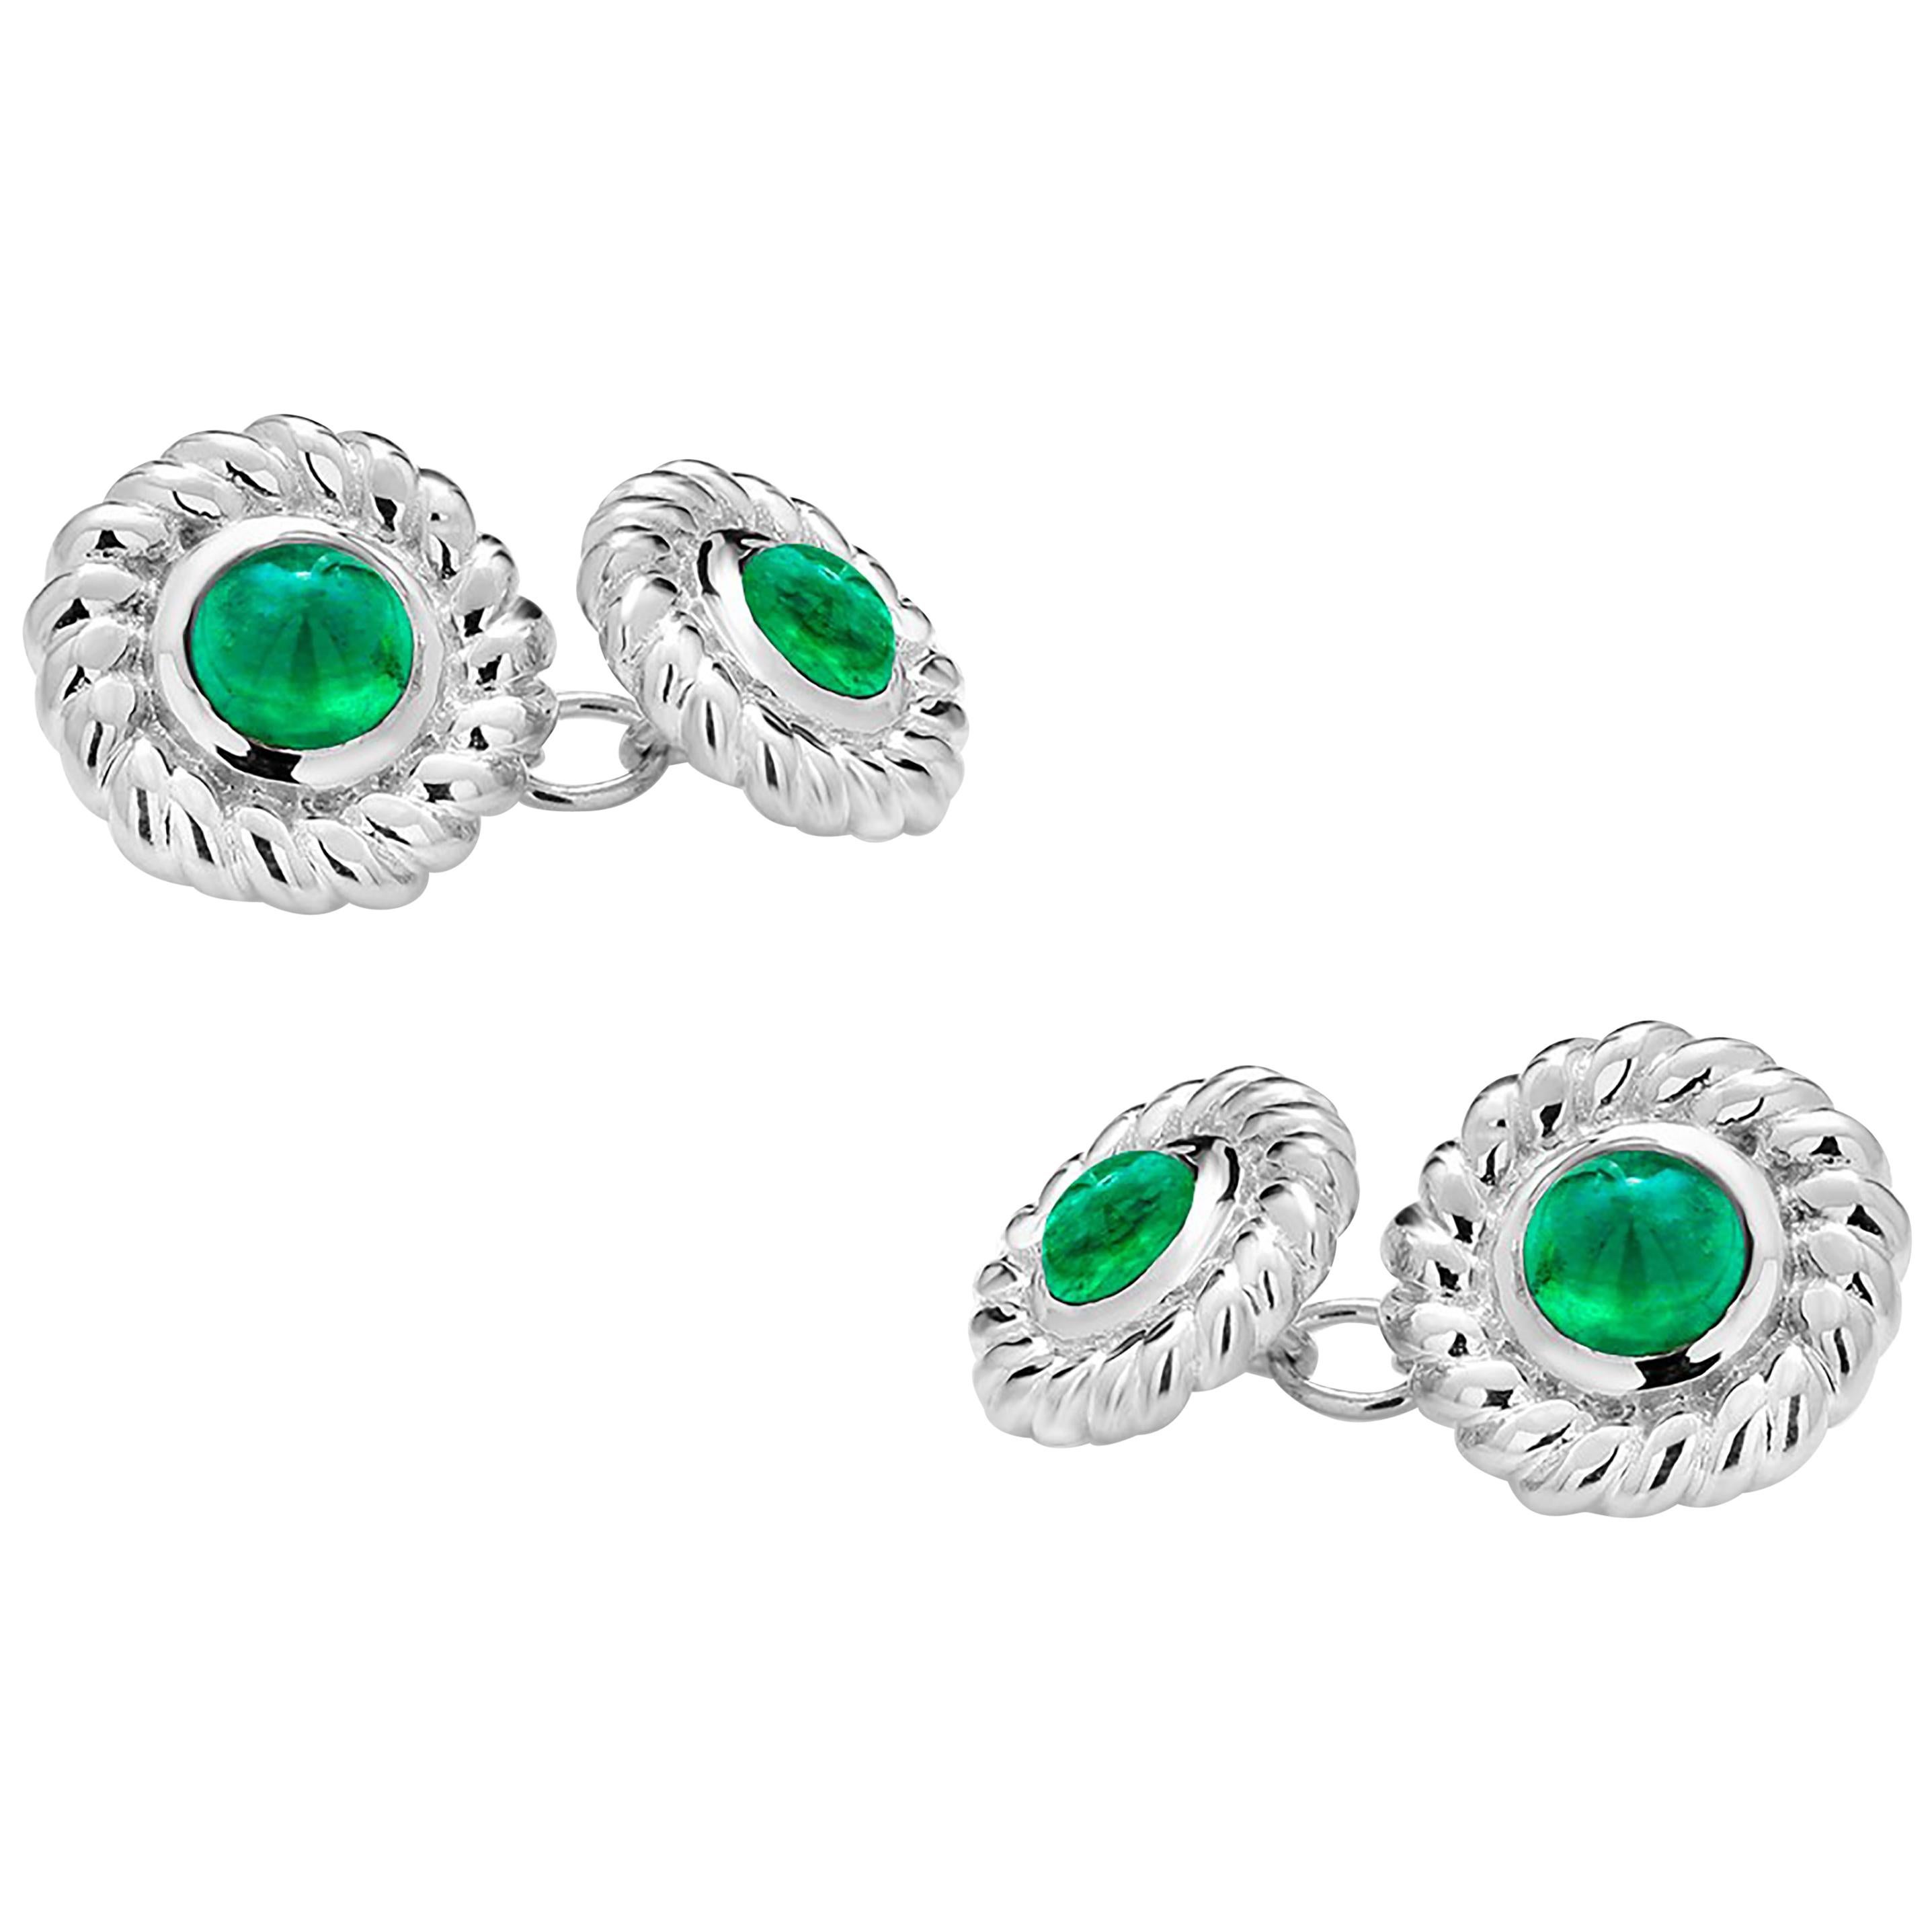 Double Sides Gold Cufflinks Matched Pair of Cabochon Emerald